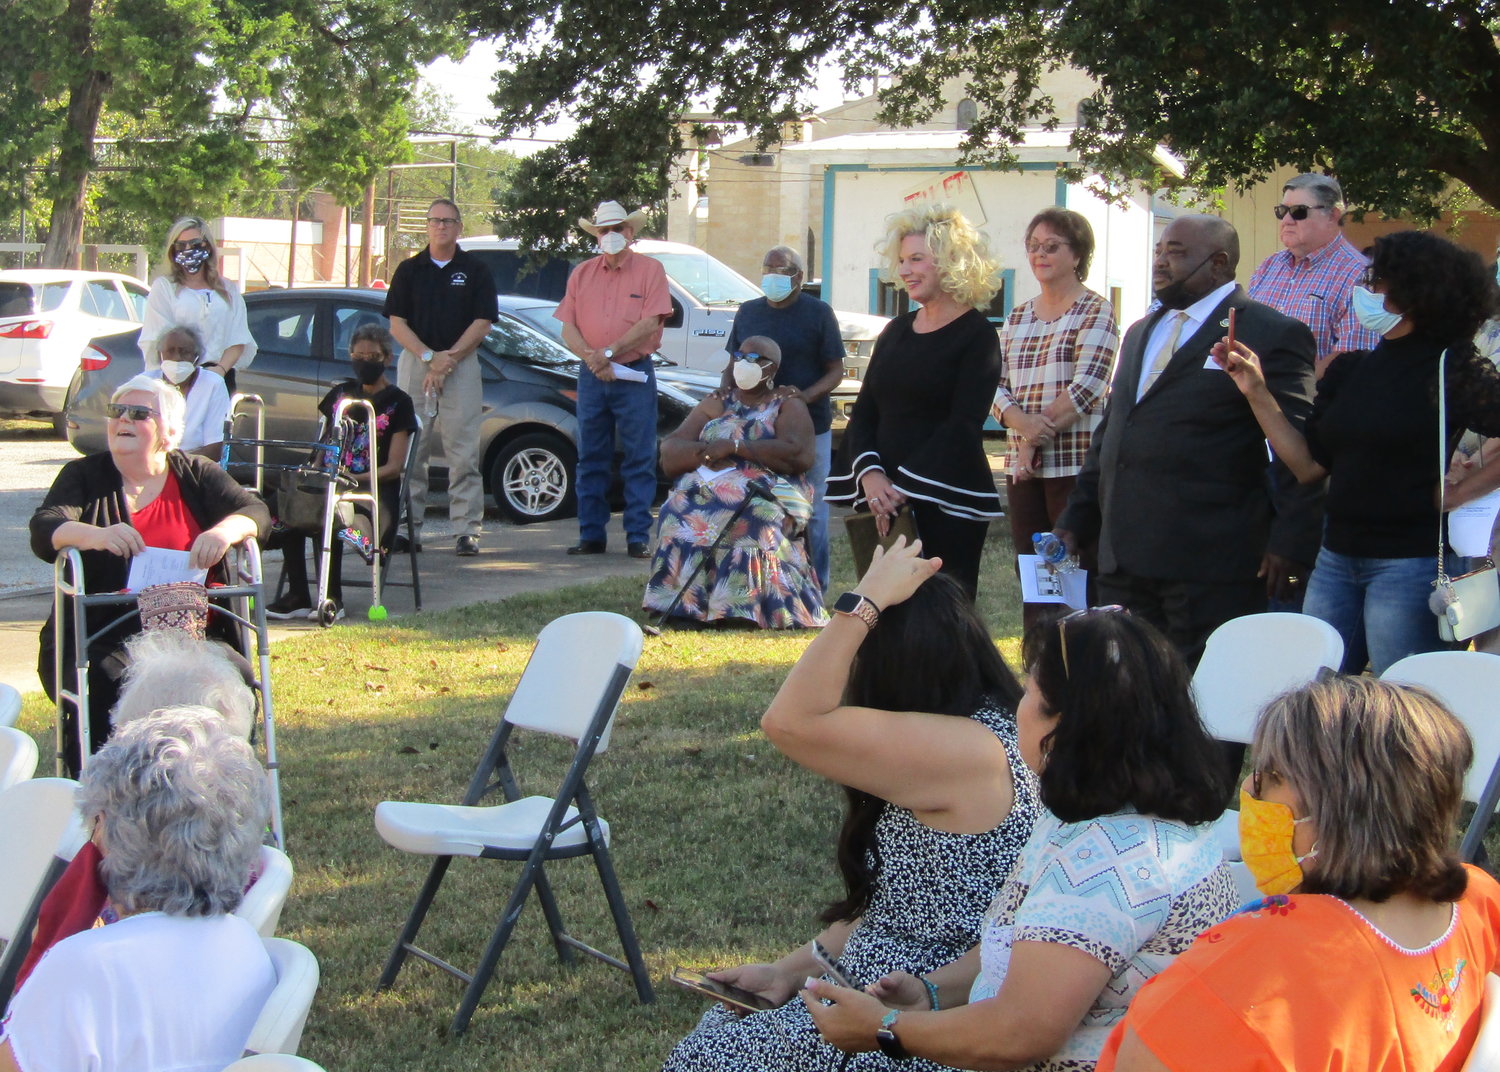 Gonzales County historian Glenda Gordon, far left, helped mark the special occasion along with alumni of the school, Main Street director Liz Reiley, Gonzales City Manager Tim Patek, Gonzales Mayor Connie Kacir and other dignitaries.